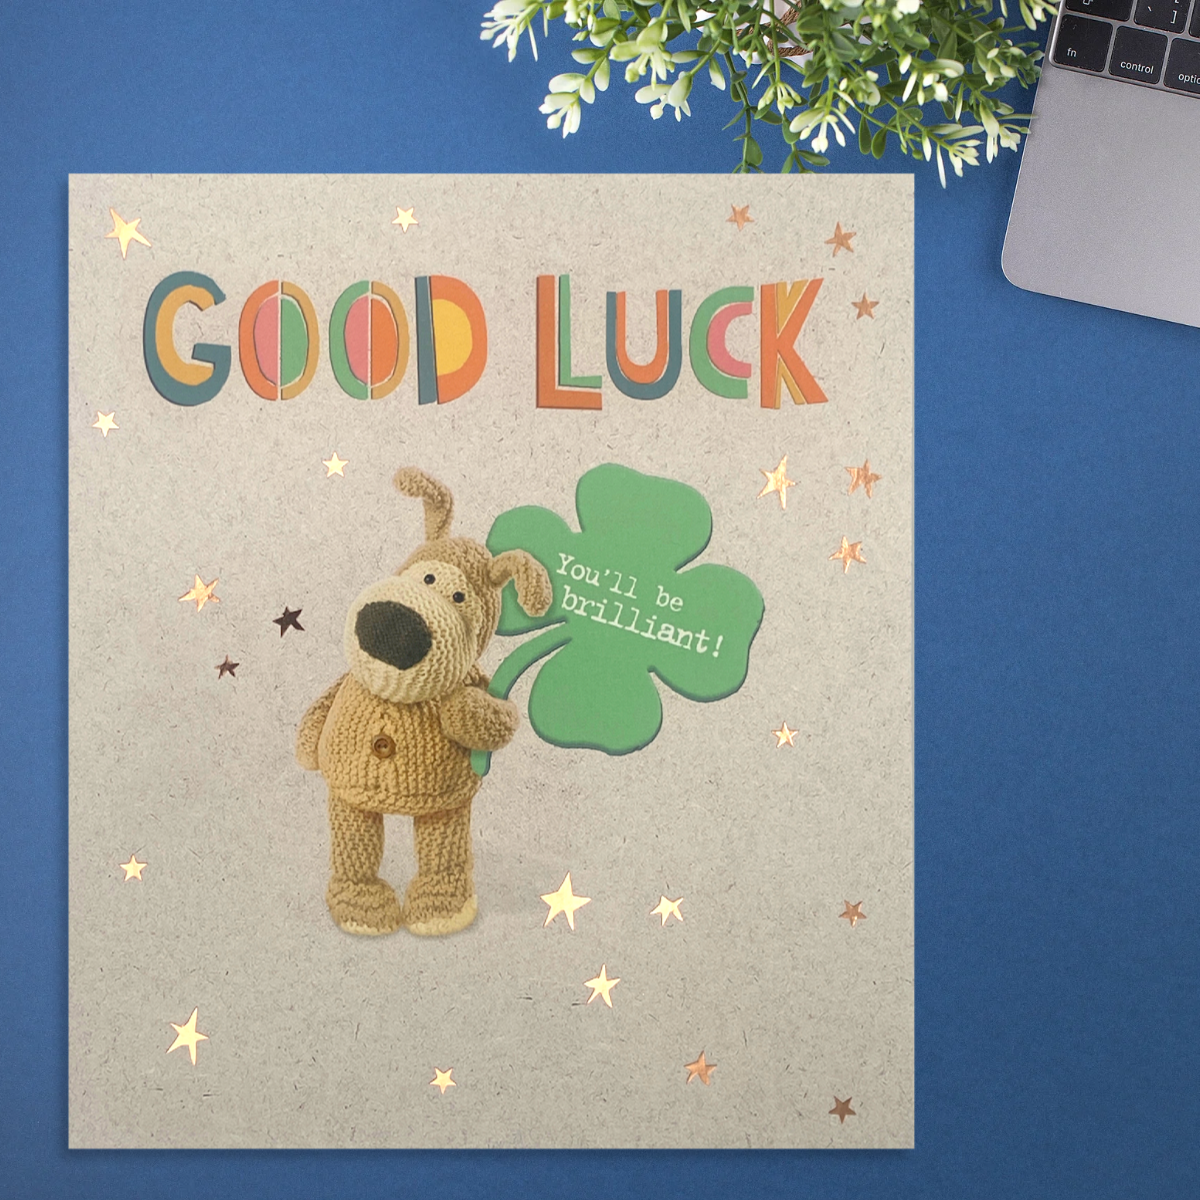 Good Luck Card - Boofle You'll Be Brilliant!